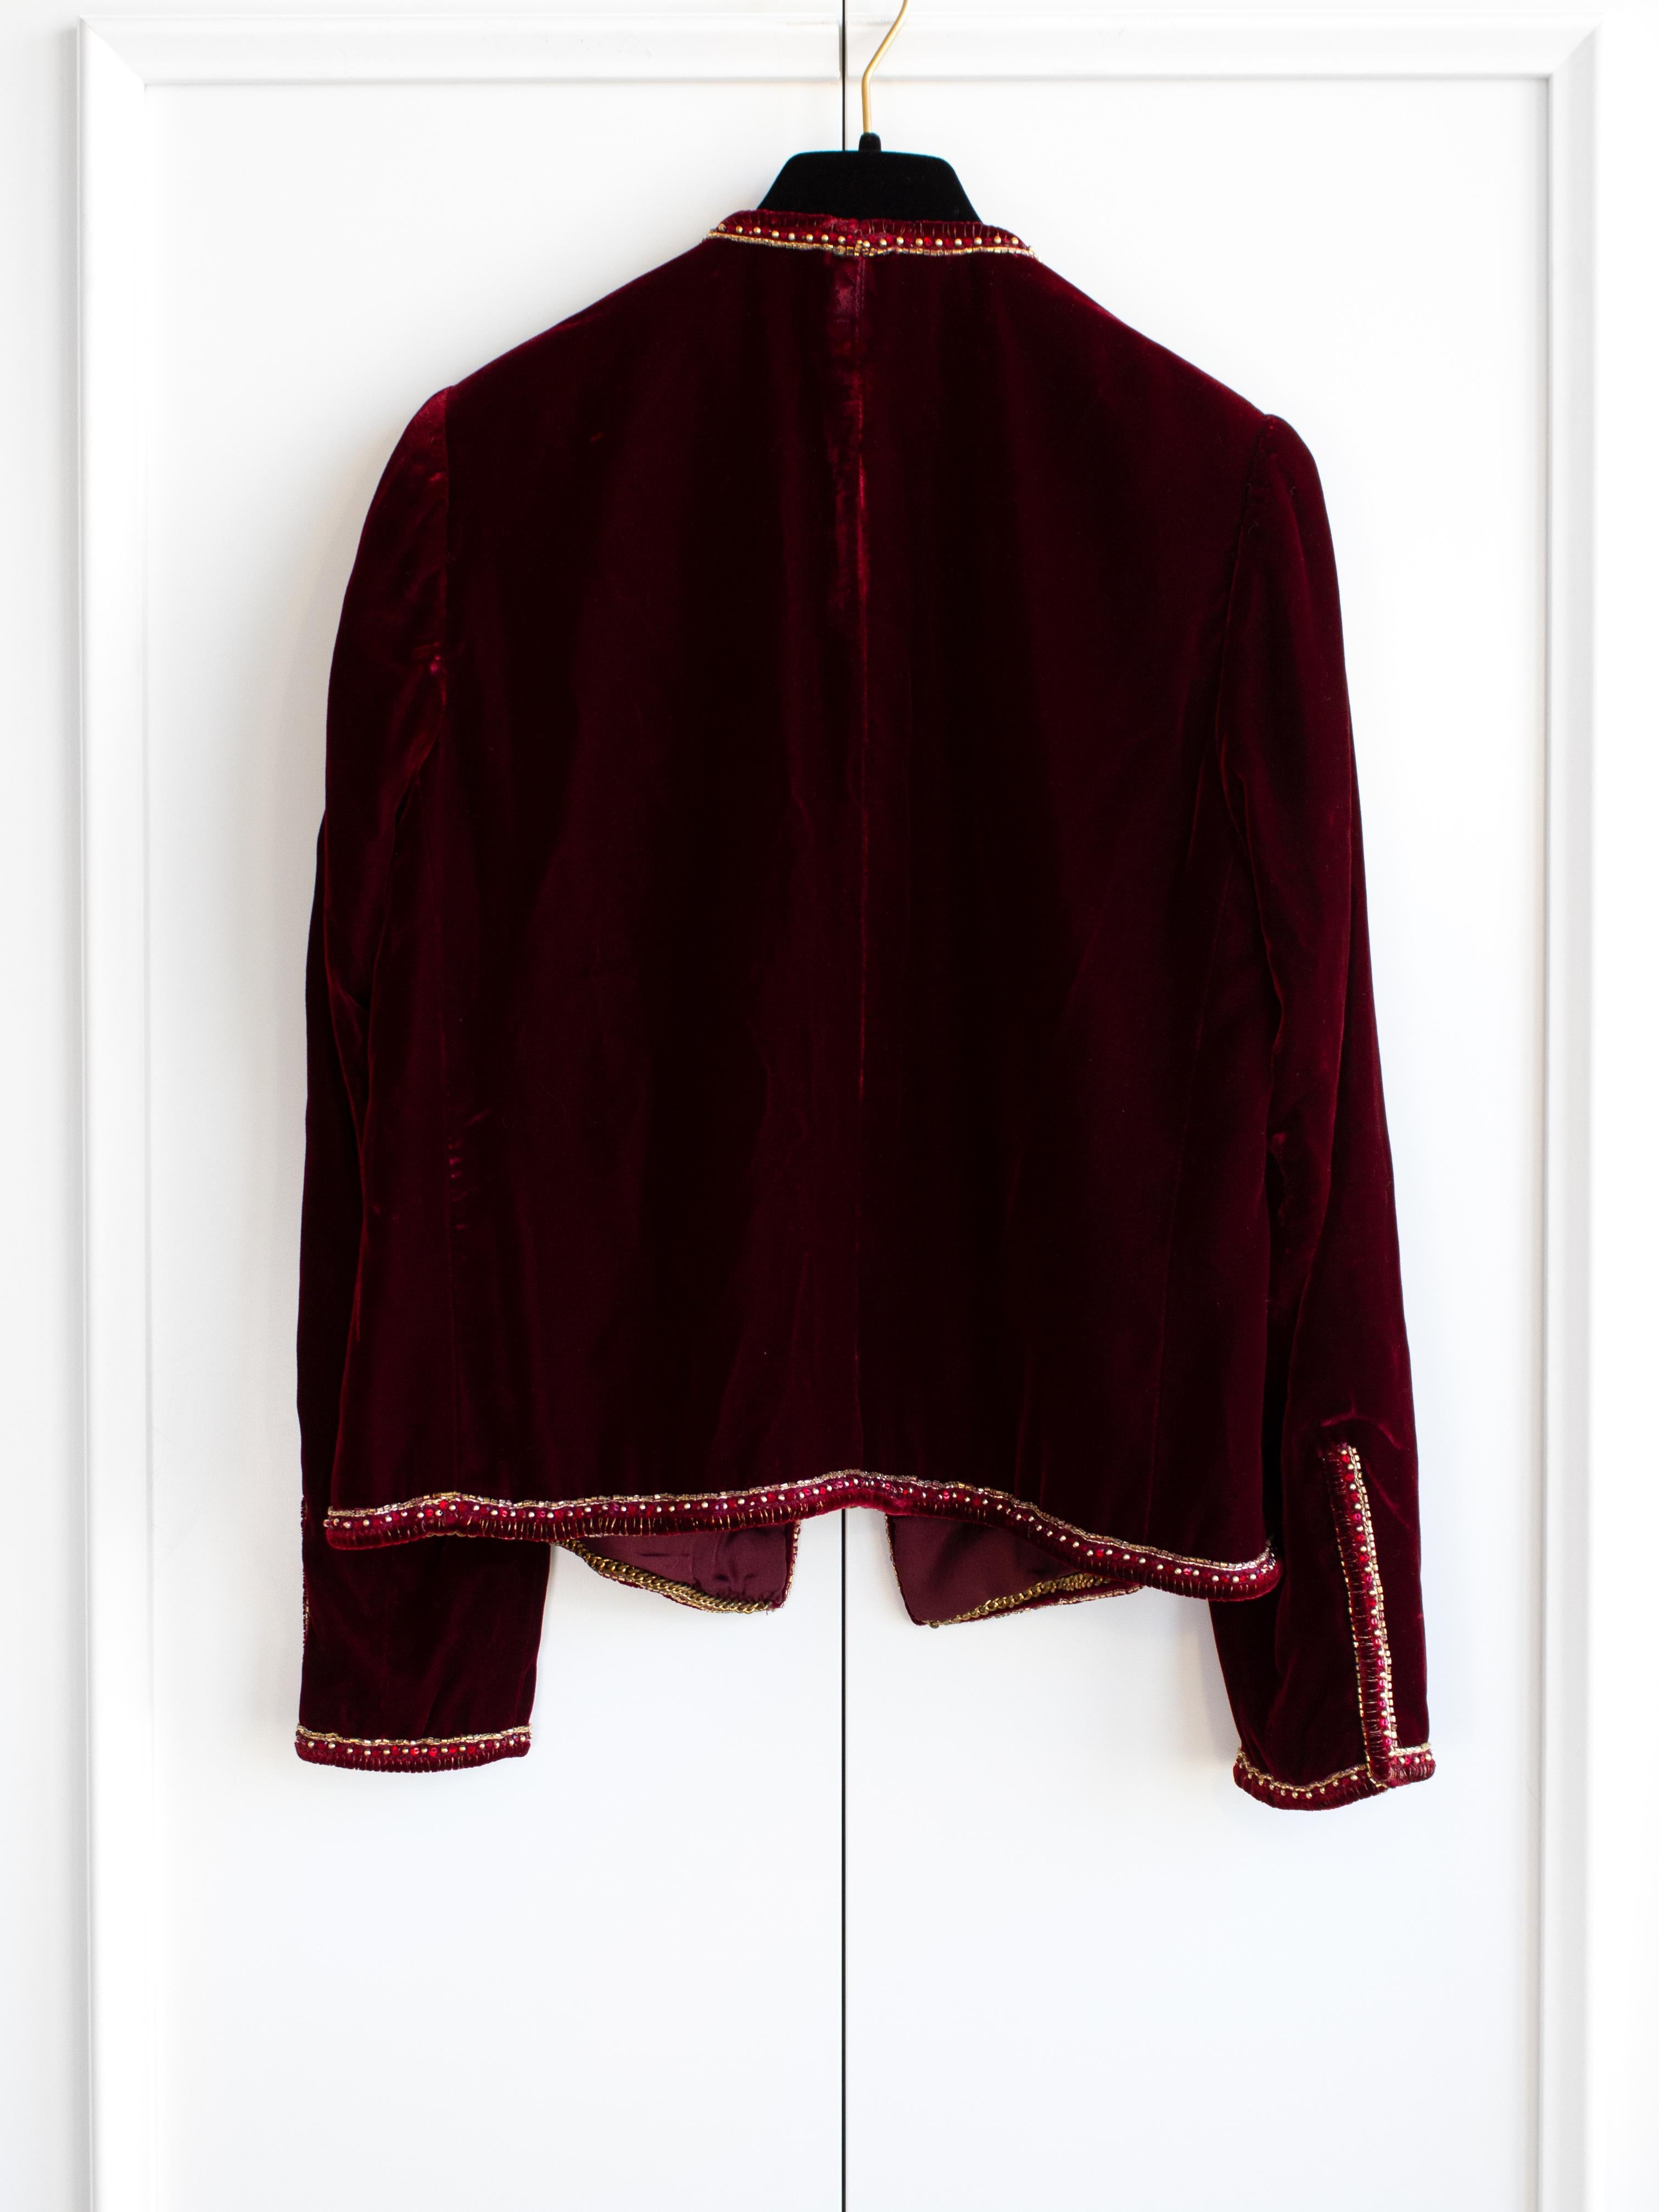 Chanel Vintage Haute Couture 1970s Burgundy Red Velvet Embellished Jacket In Excellent Condition For Sale In Jersey City, NJ